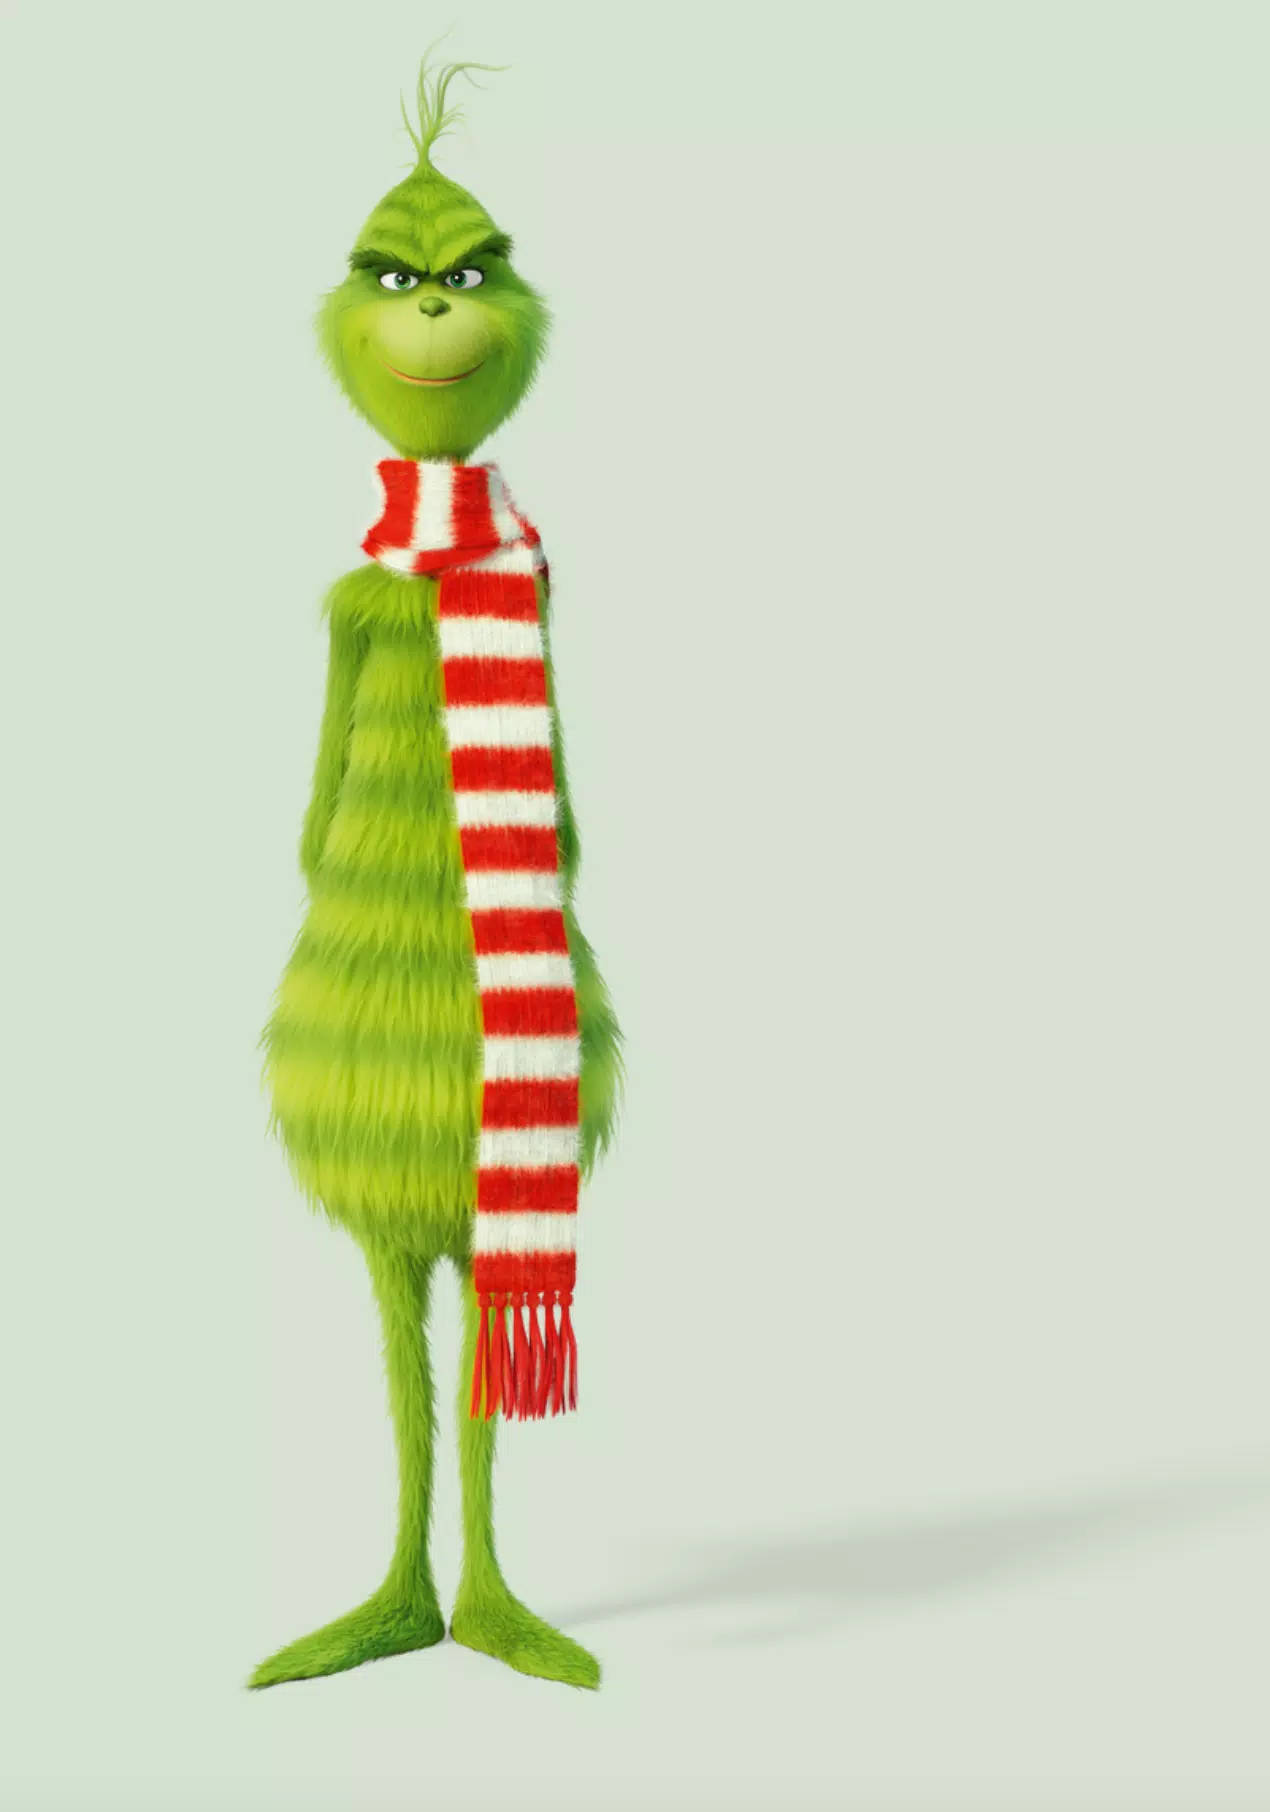 The Grinch Red And White Scarf Wallpaper